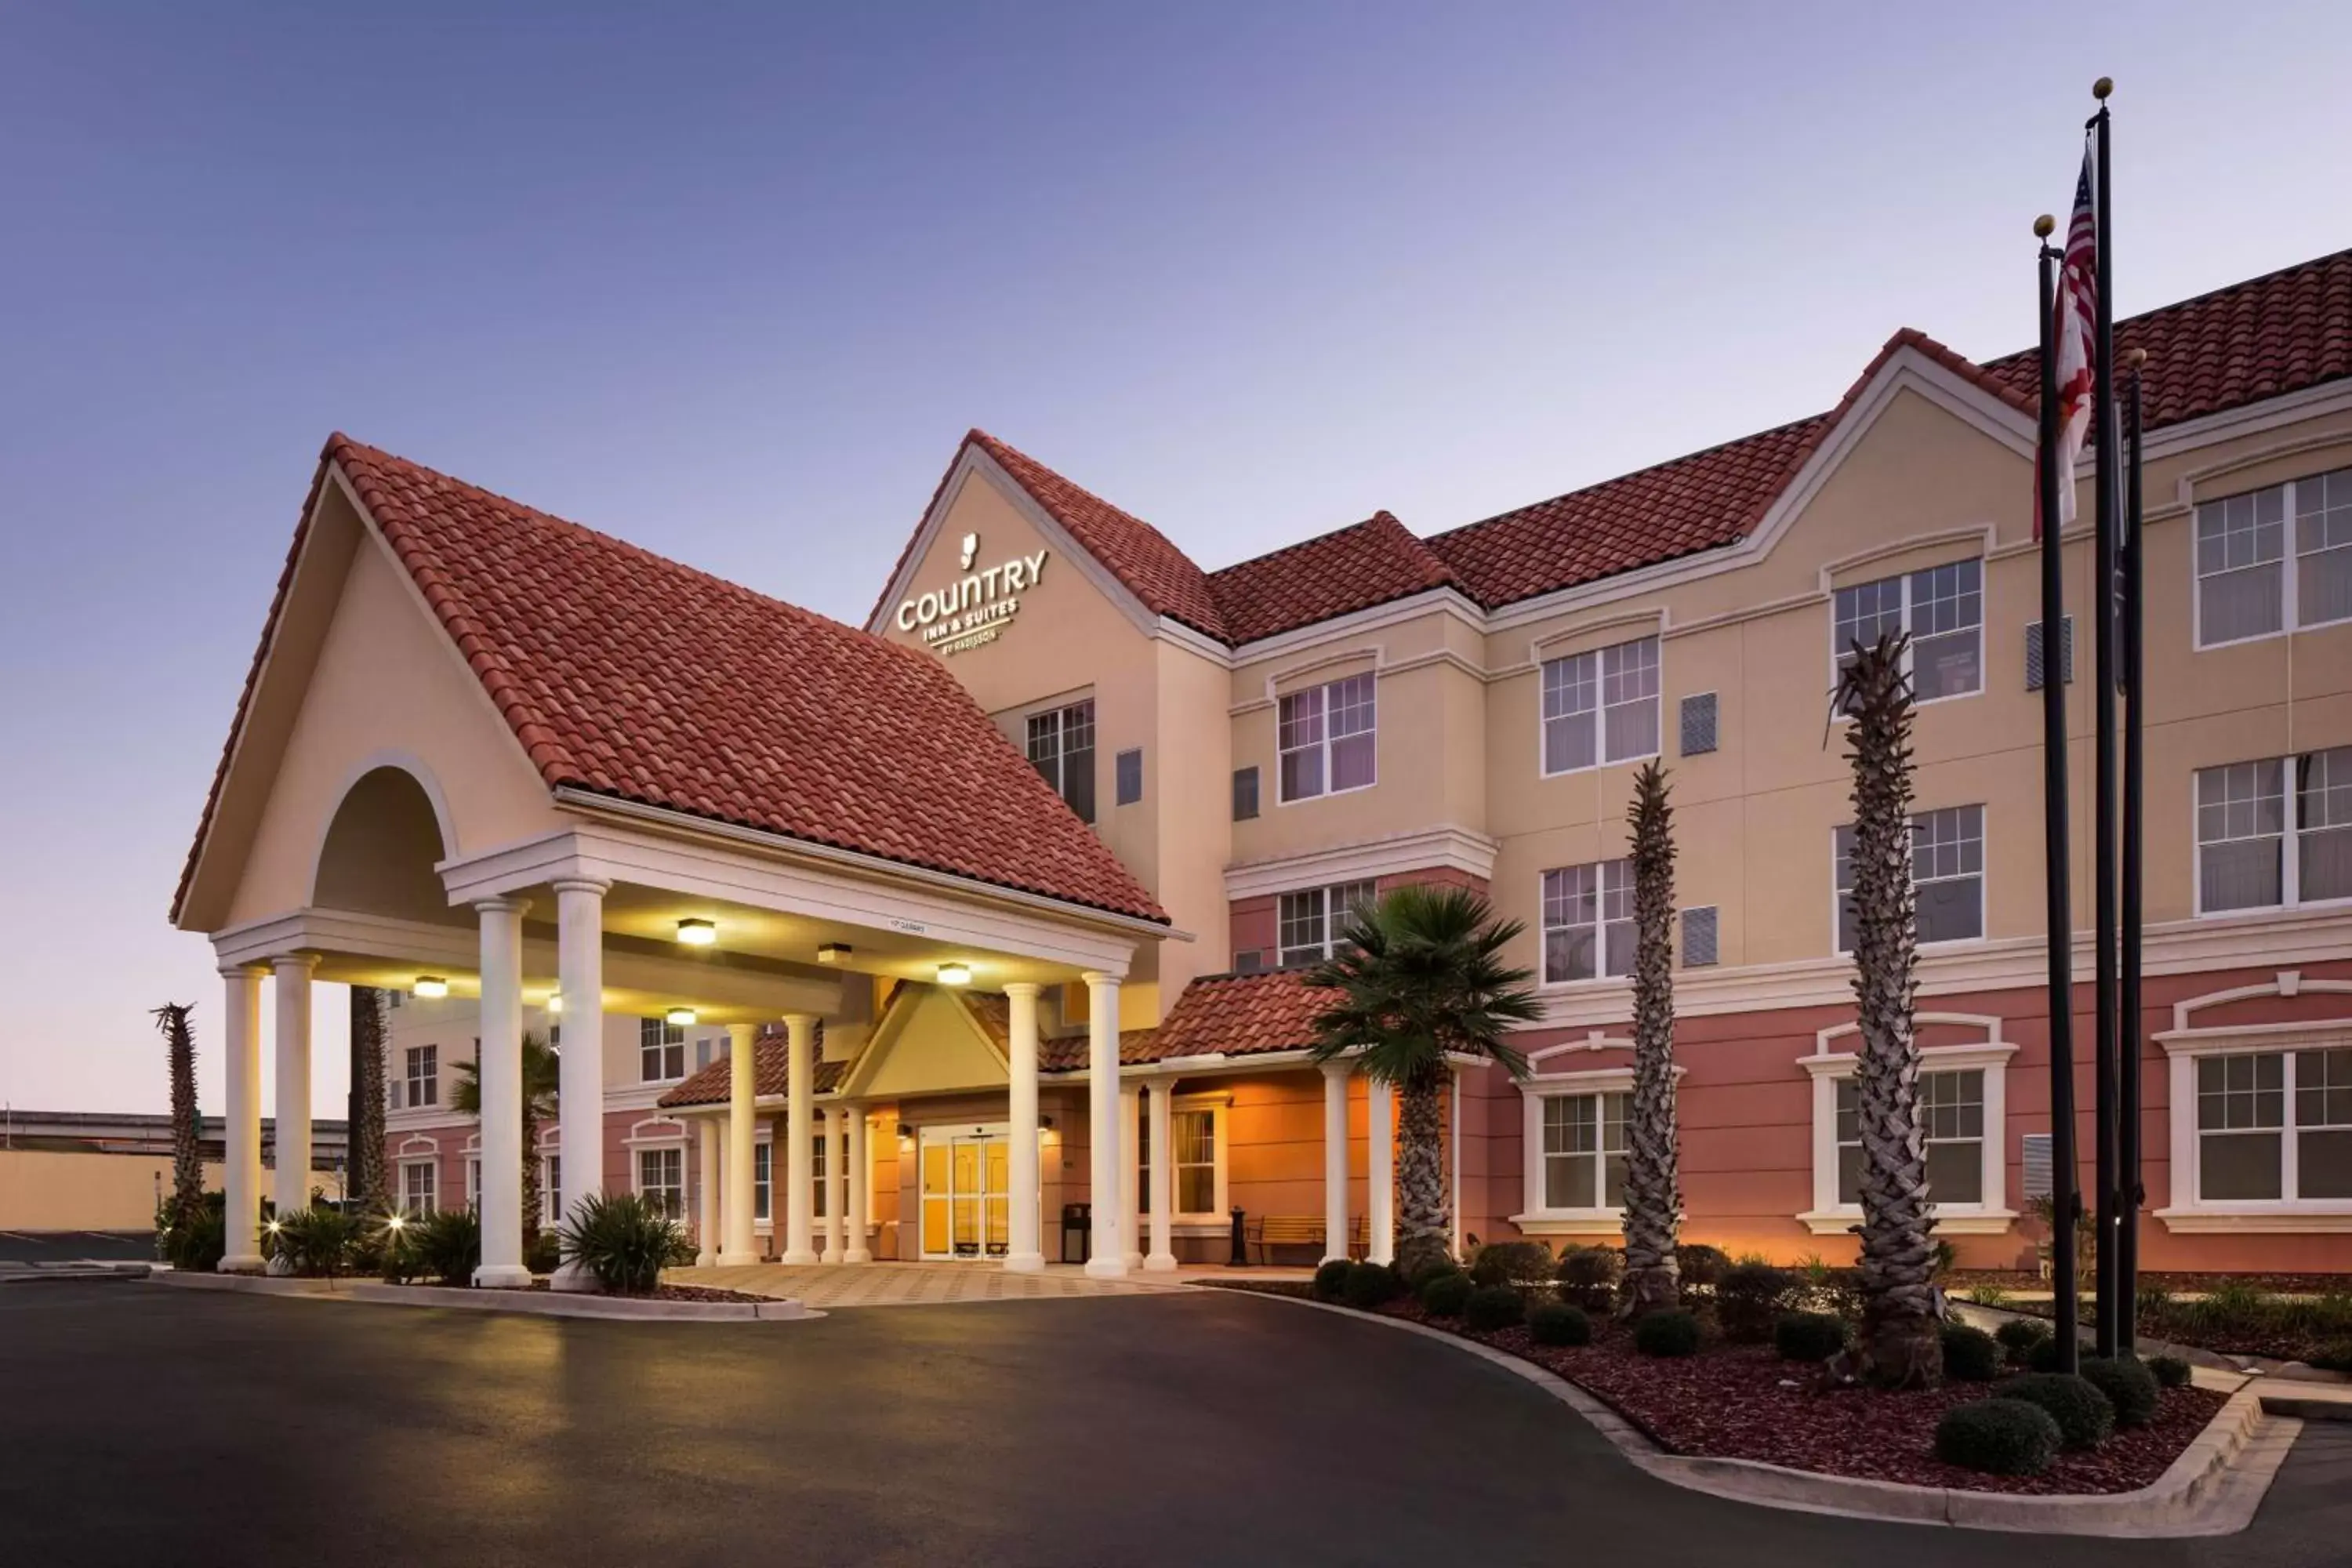 Property Building in Country Inn & Suites by Radisson, Crestview, FL